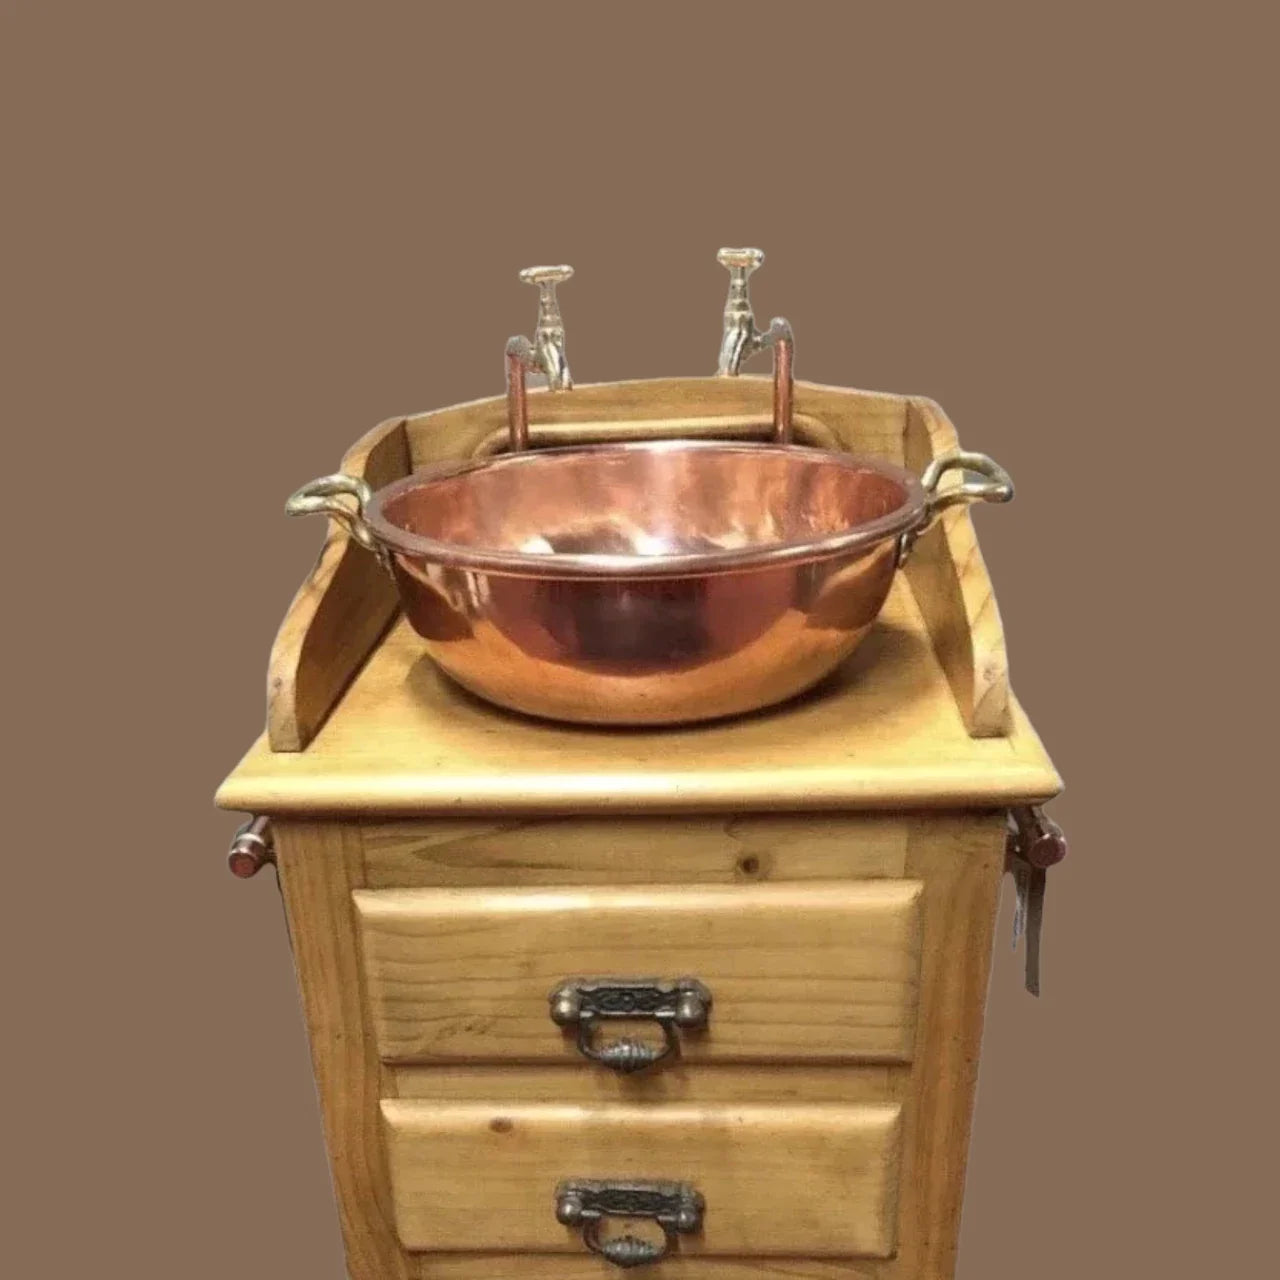 Copper Basins, Taps and Sinks